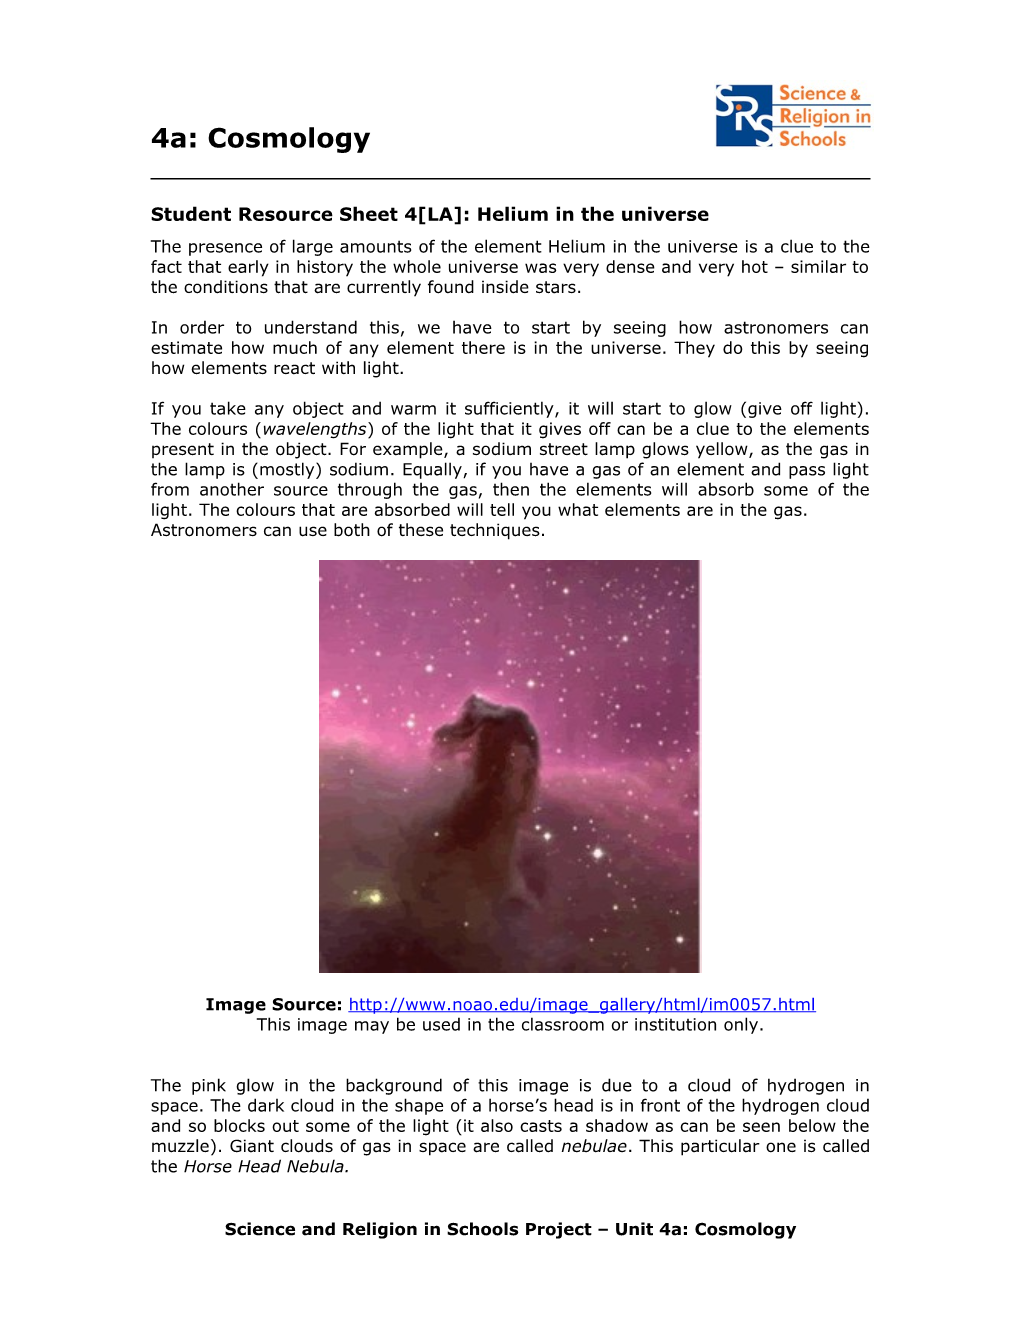 Student Resource Sheet 4 LA : Helium in the Universe